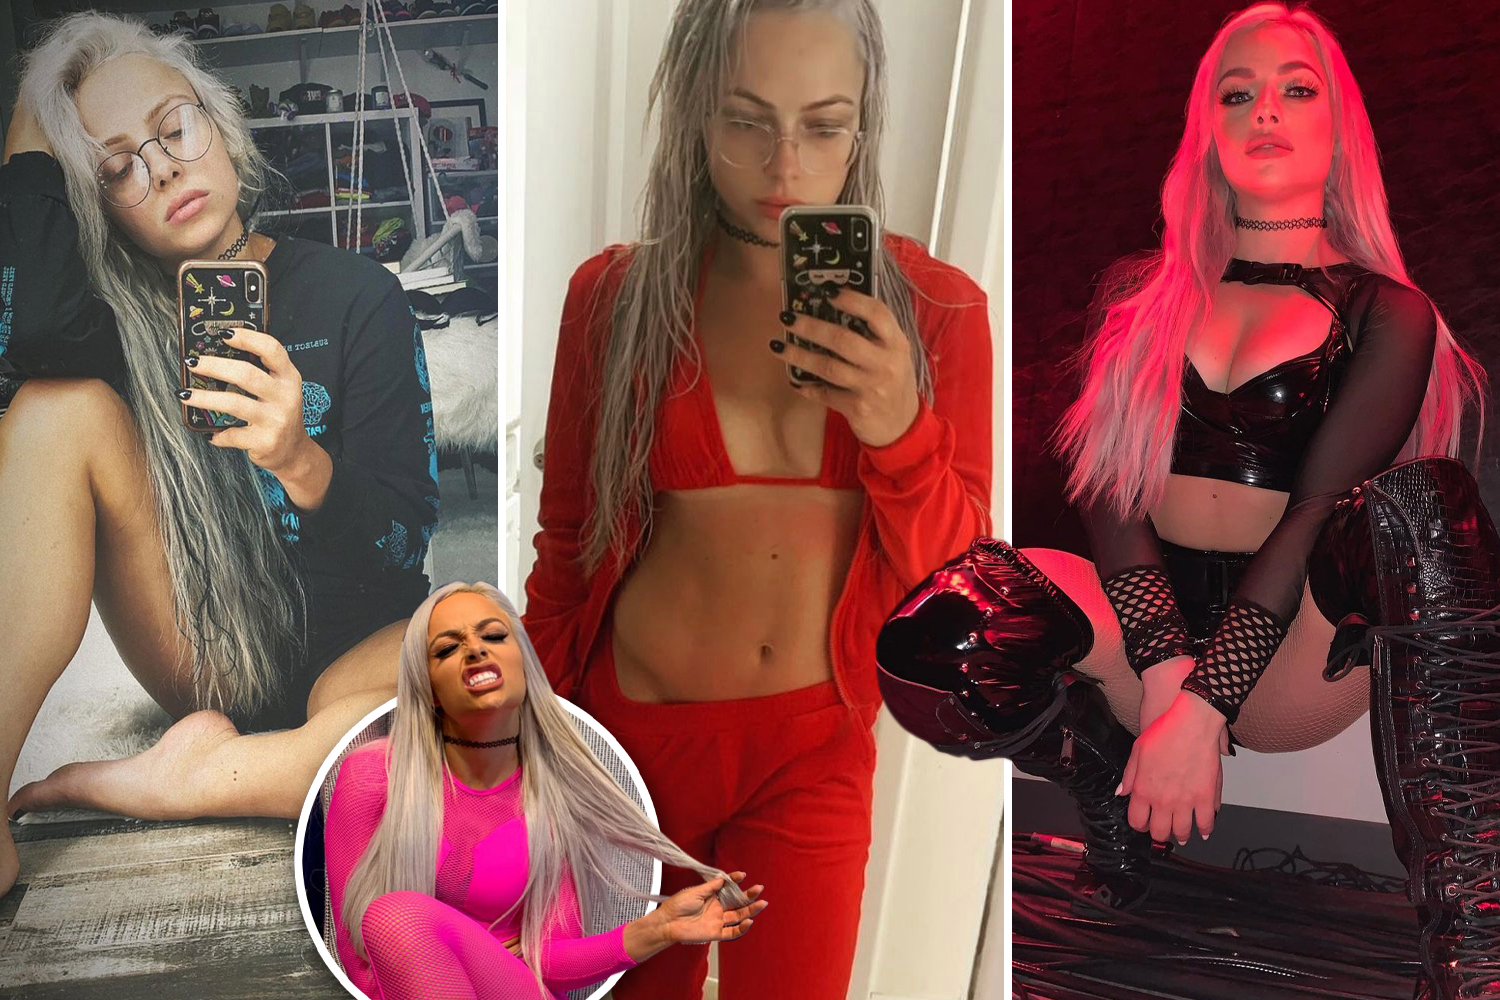 christian speight recommends liv morgan boobs pic